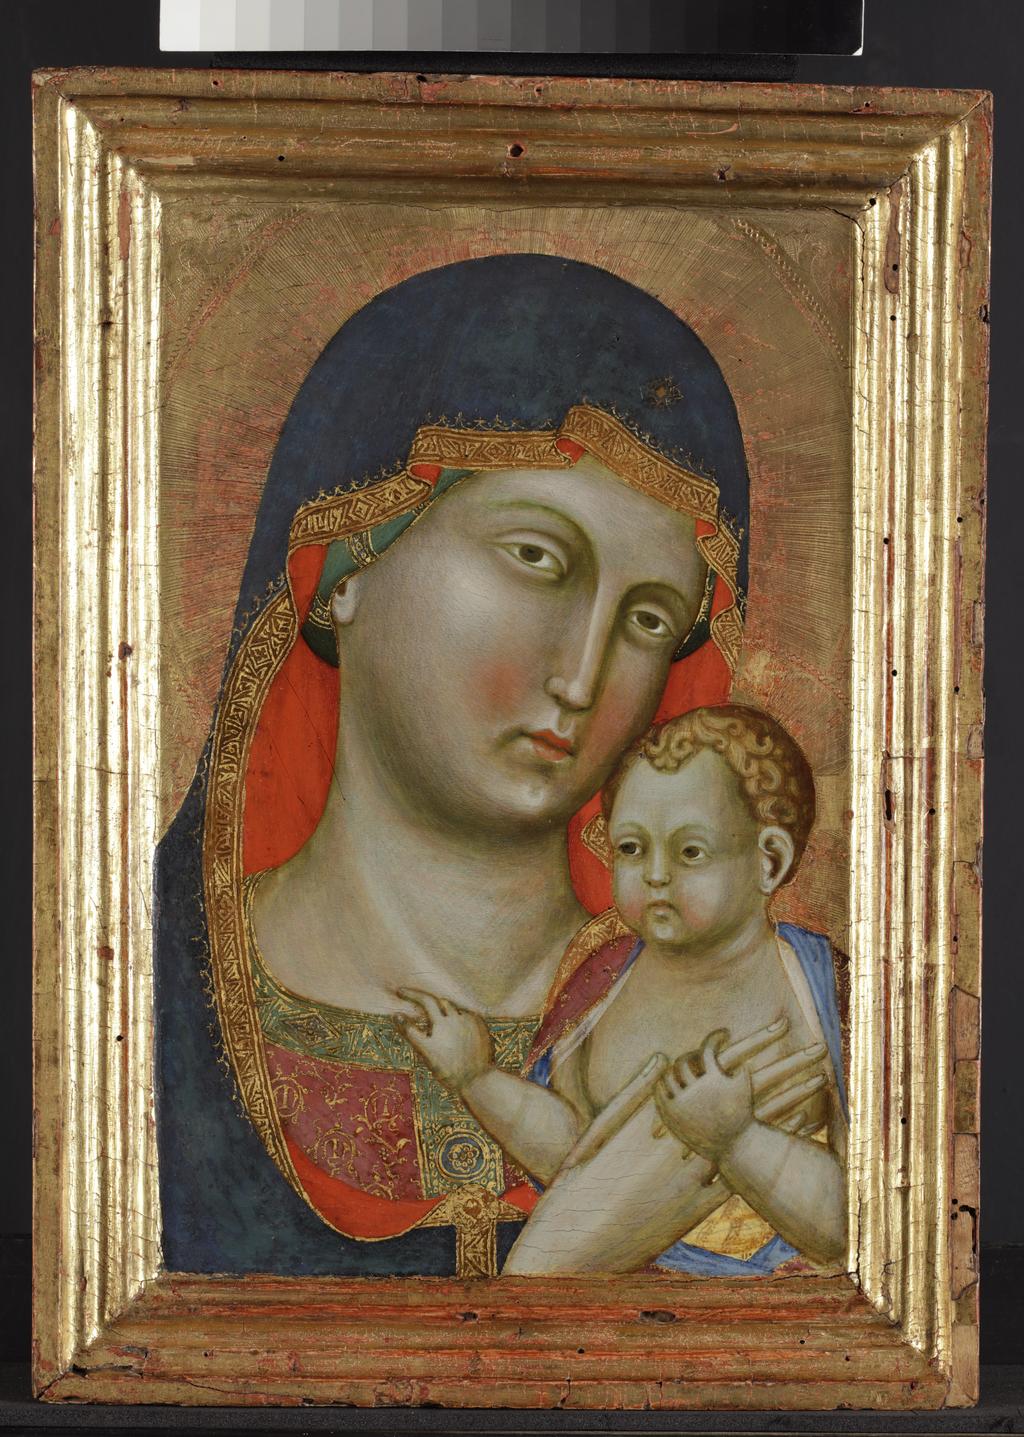 An image of Virgin and Child. Pietro di Niccolo da Orvieto (Italian, 1430-1484). Egg tempera with gold on wooden panel, height 31.4 cm, width 20.3 cm, circa 1400. Umbrian School. Acquisition Credit: given by Francis Neilson through the National Art Collections Fund.